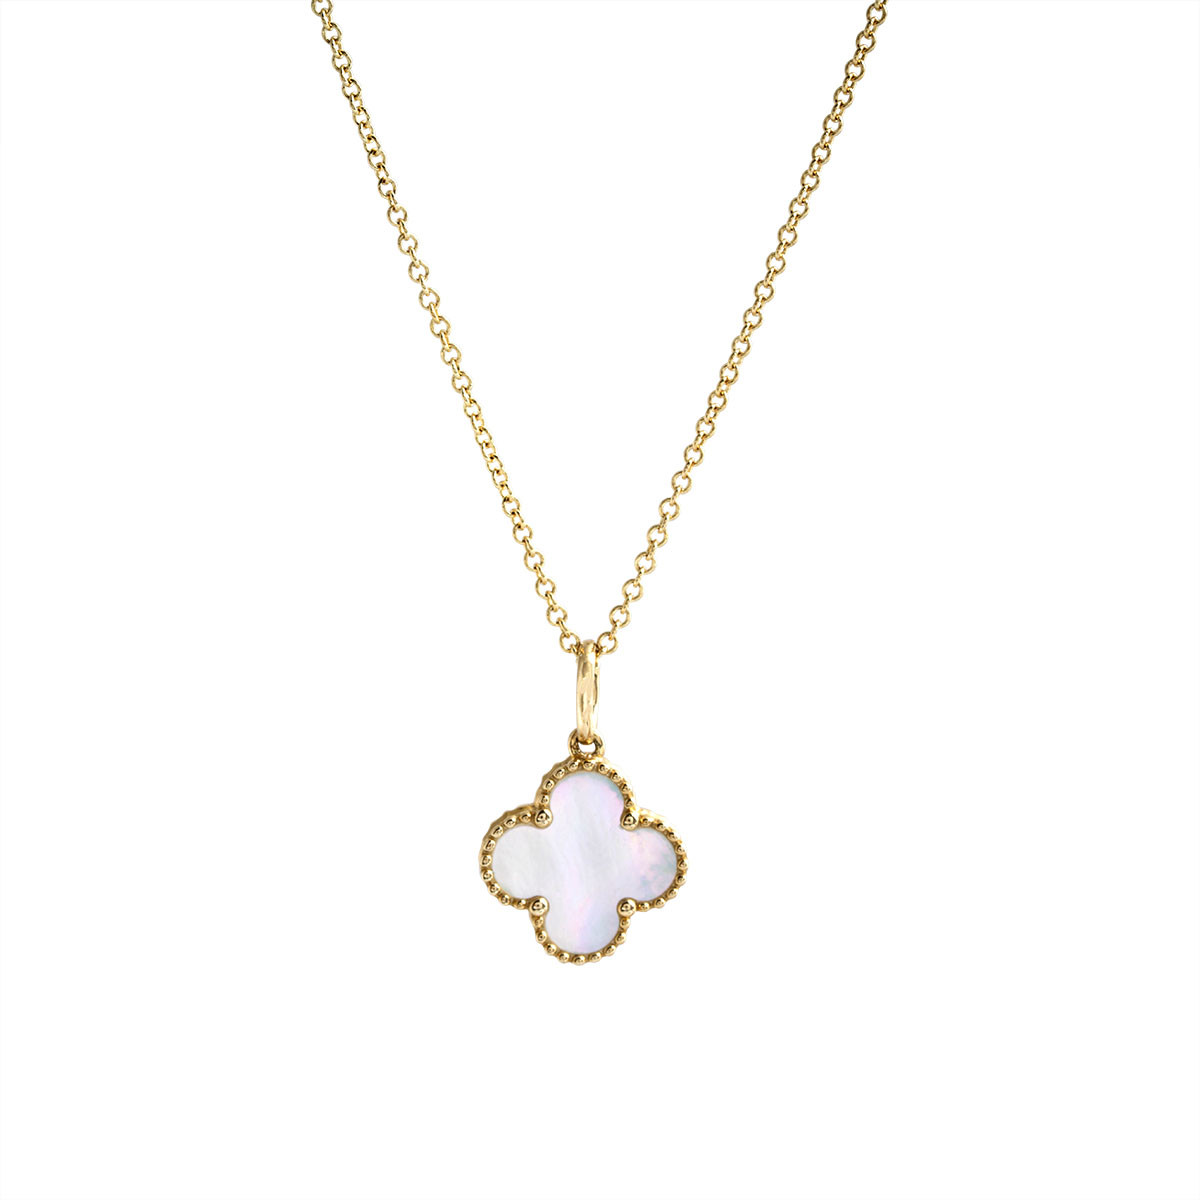 New Madison L 0.47 CT Mother-of-Pearl Clover Necklace - Shop Jewelry ...